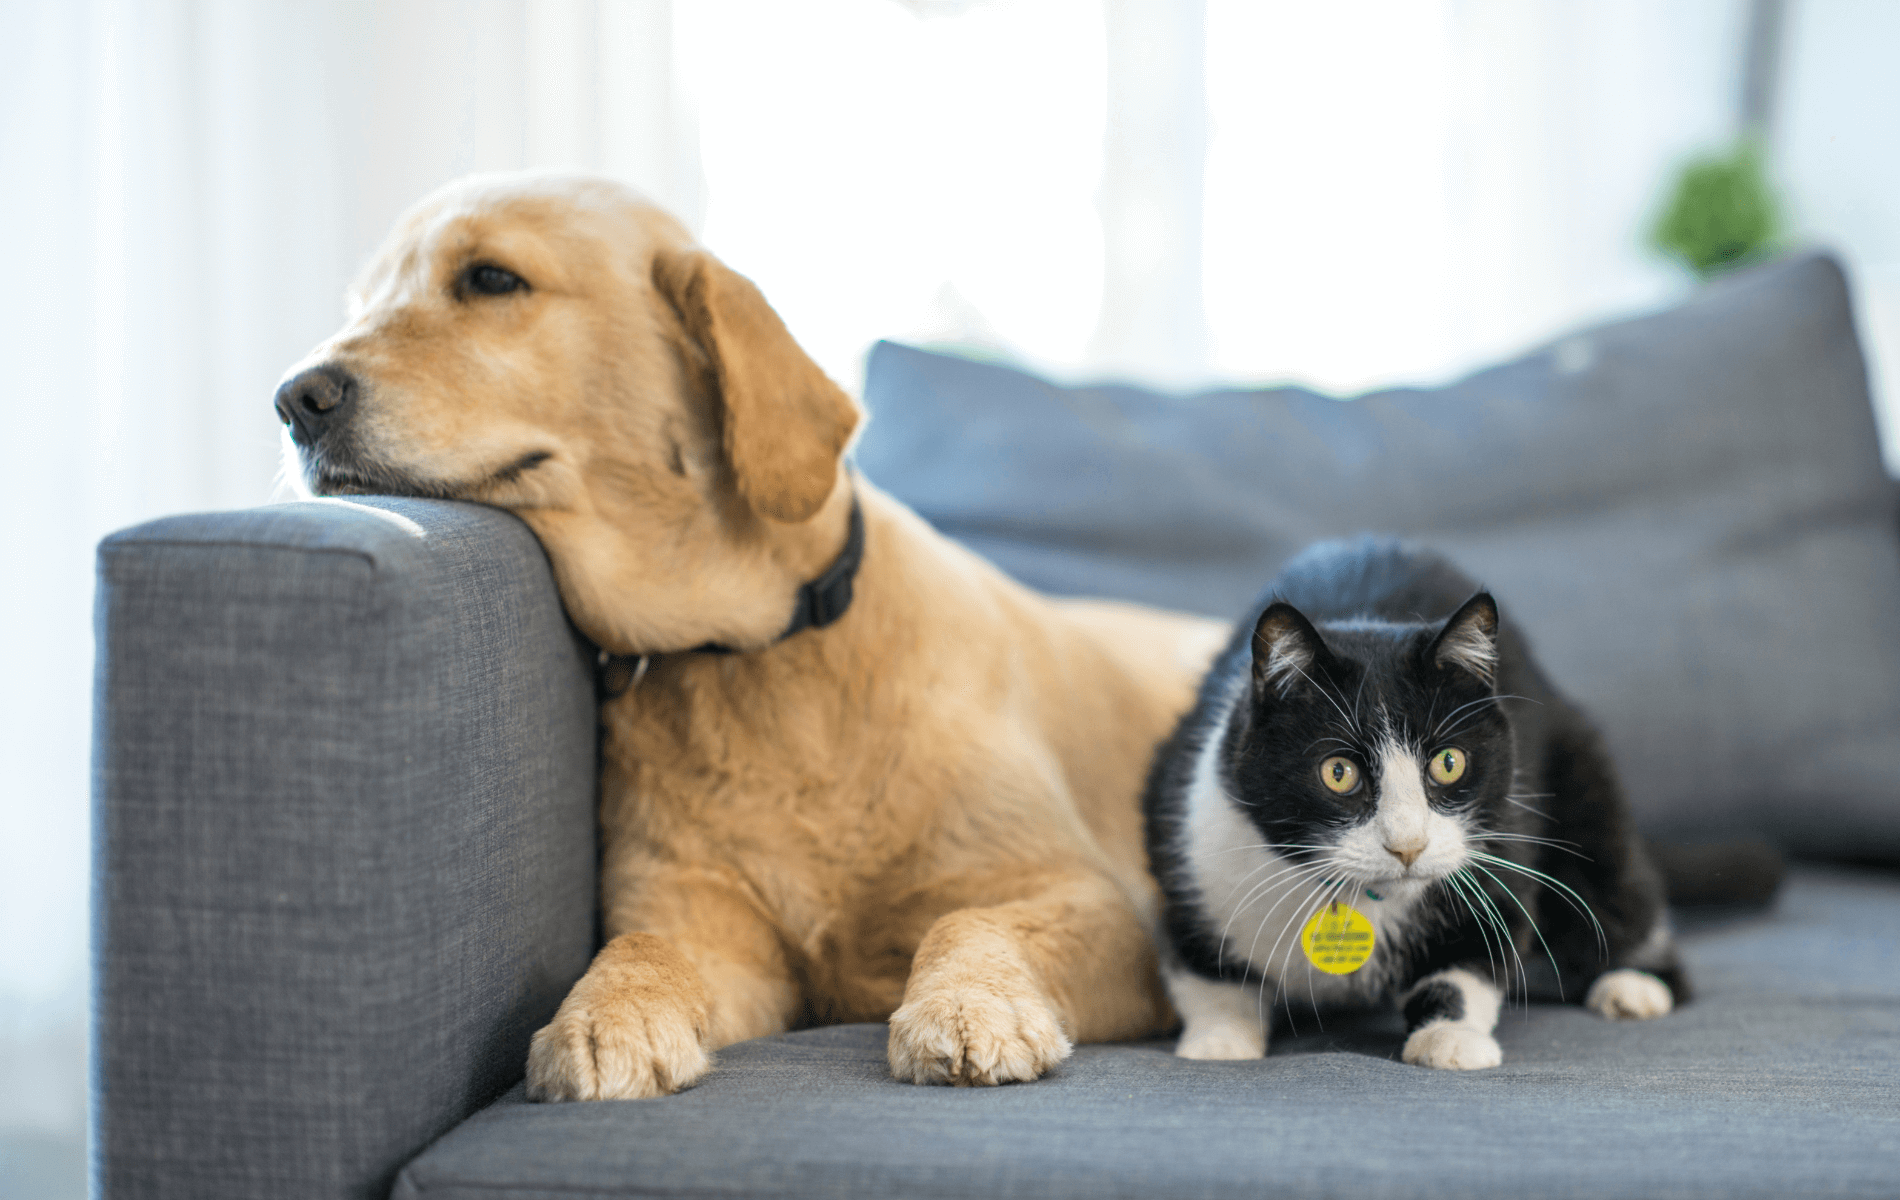 A dog and cat lying on a couch